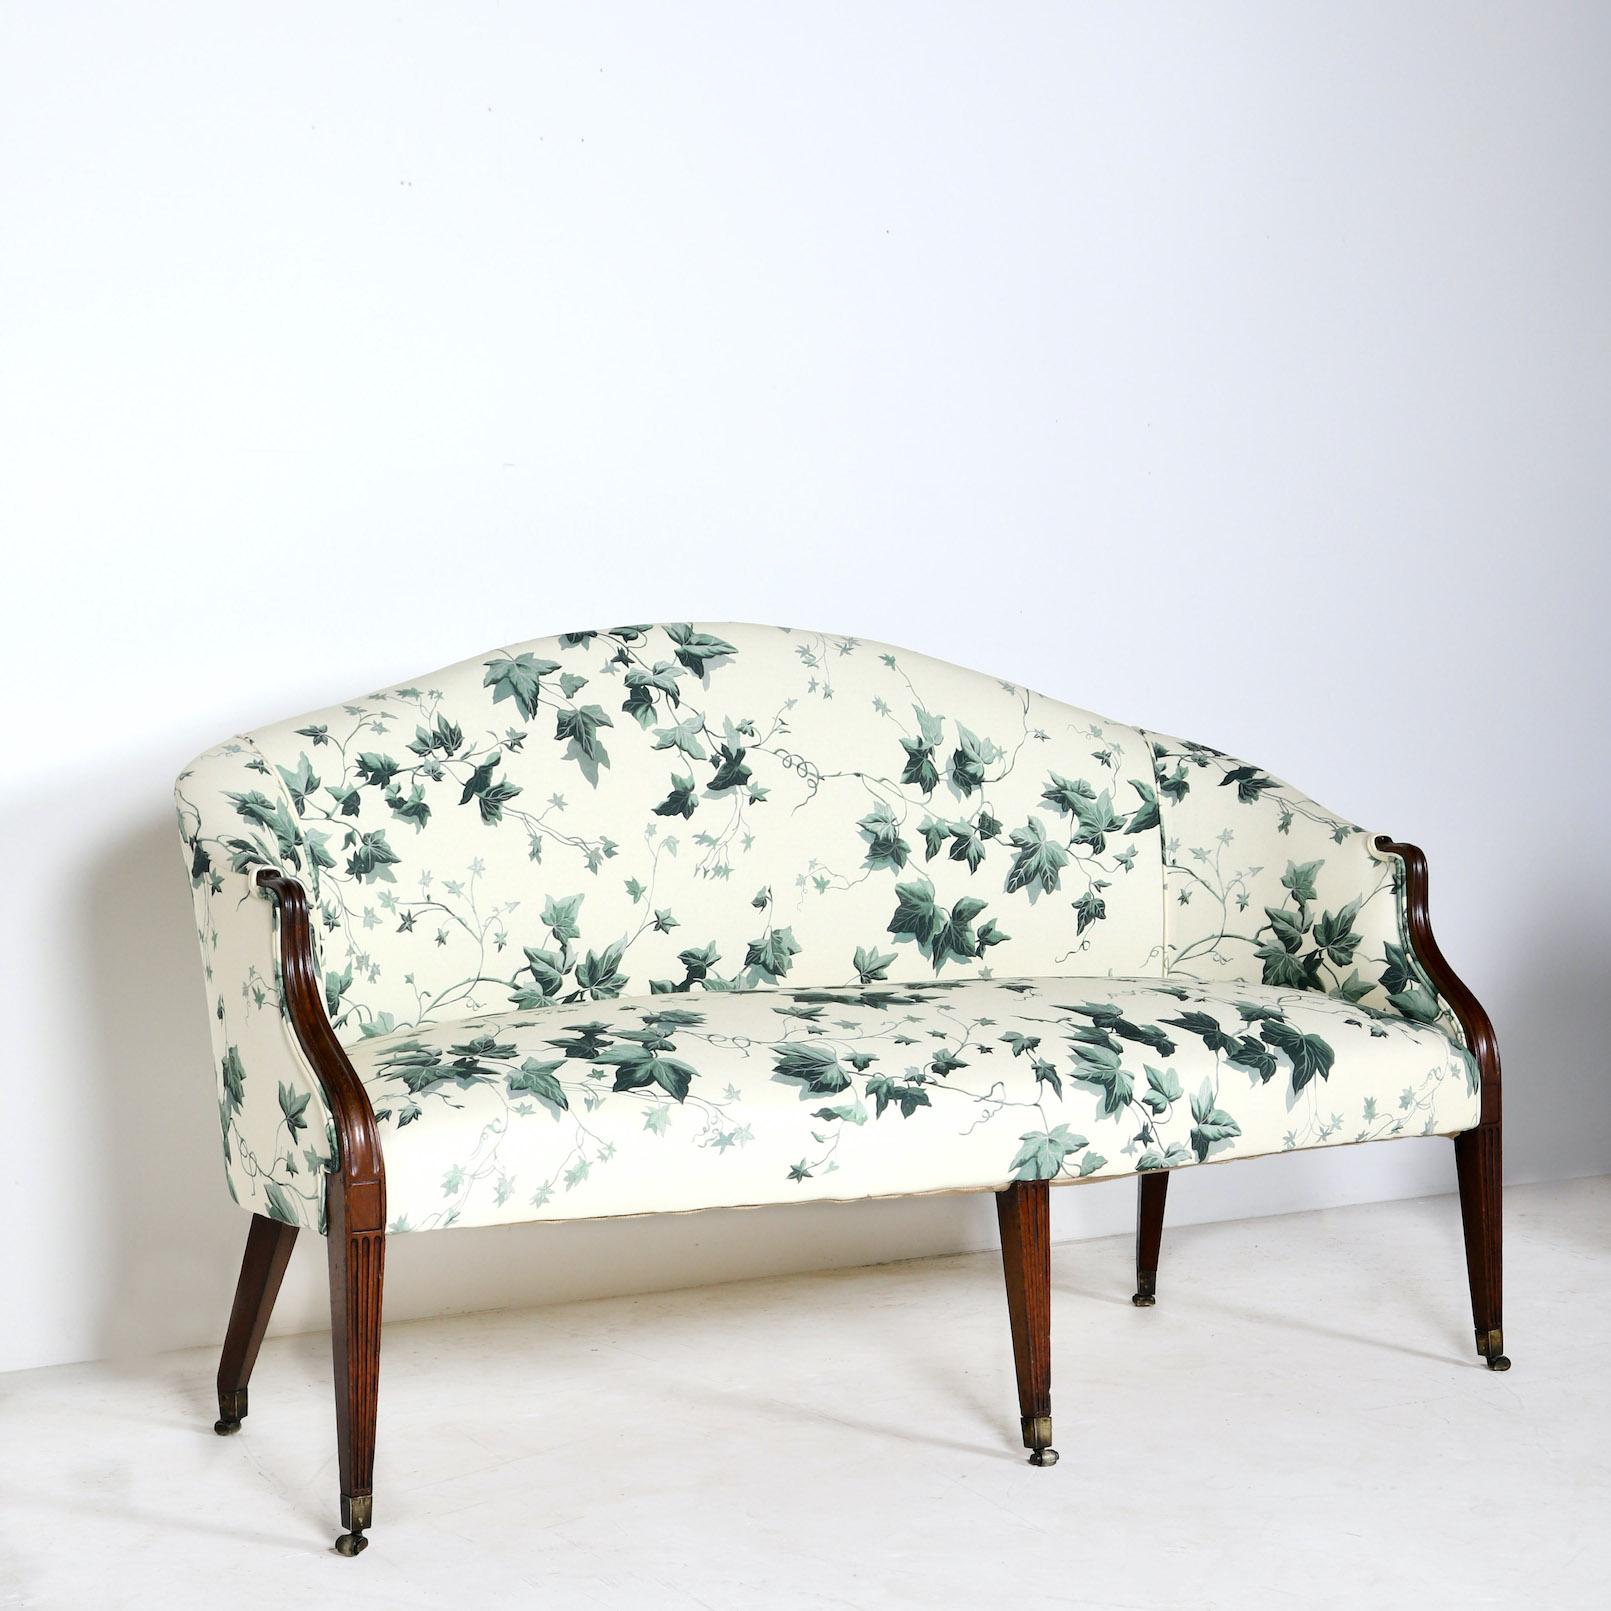 Vagabond Antiques presents a George III sofa

England, Circa 1790

” A stylish shape to this 18th century sofa, re-invented in a Ivy print fabric from ‘House of Hackney’ ”